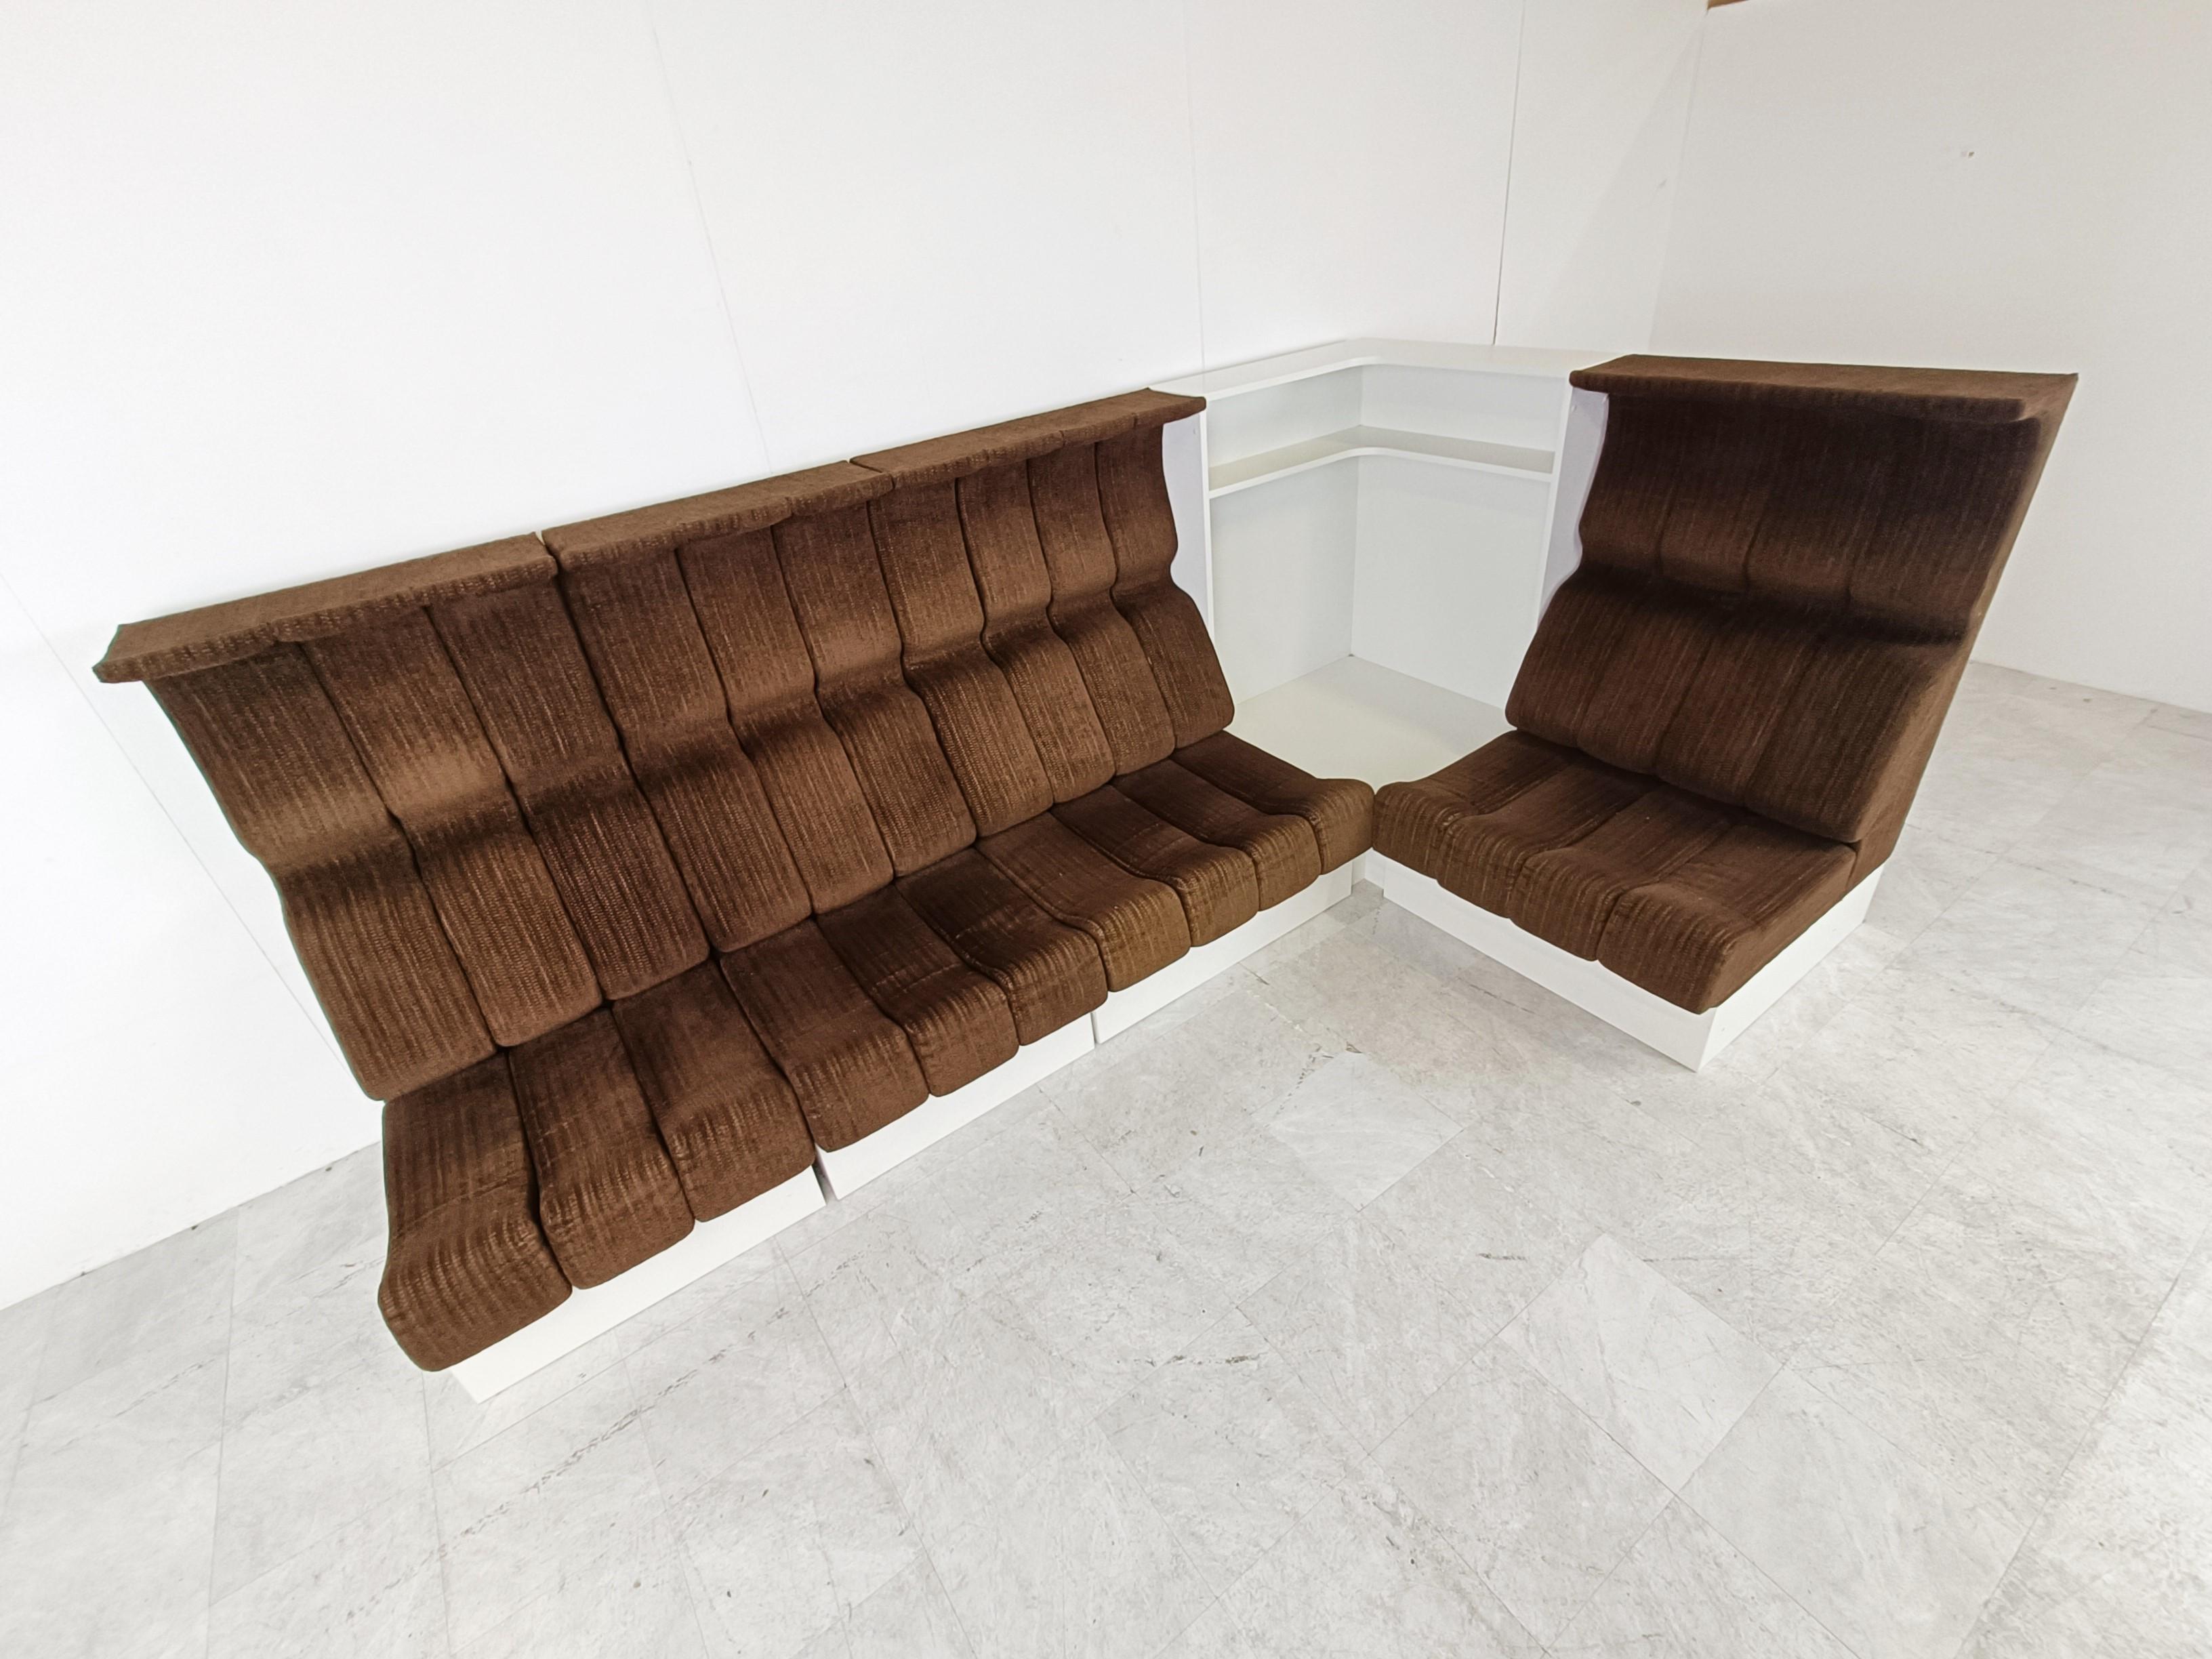 Space Age Sofa by Interlübke, 1970s For Sale 1